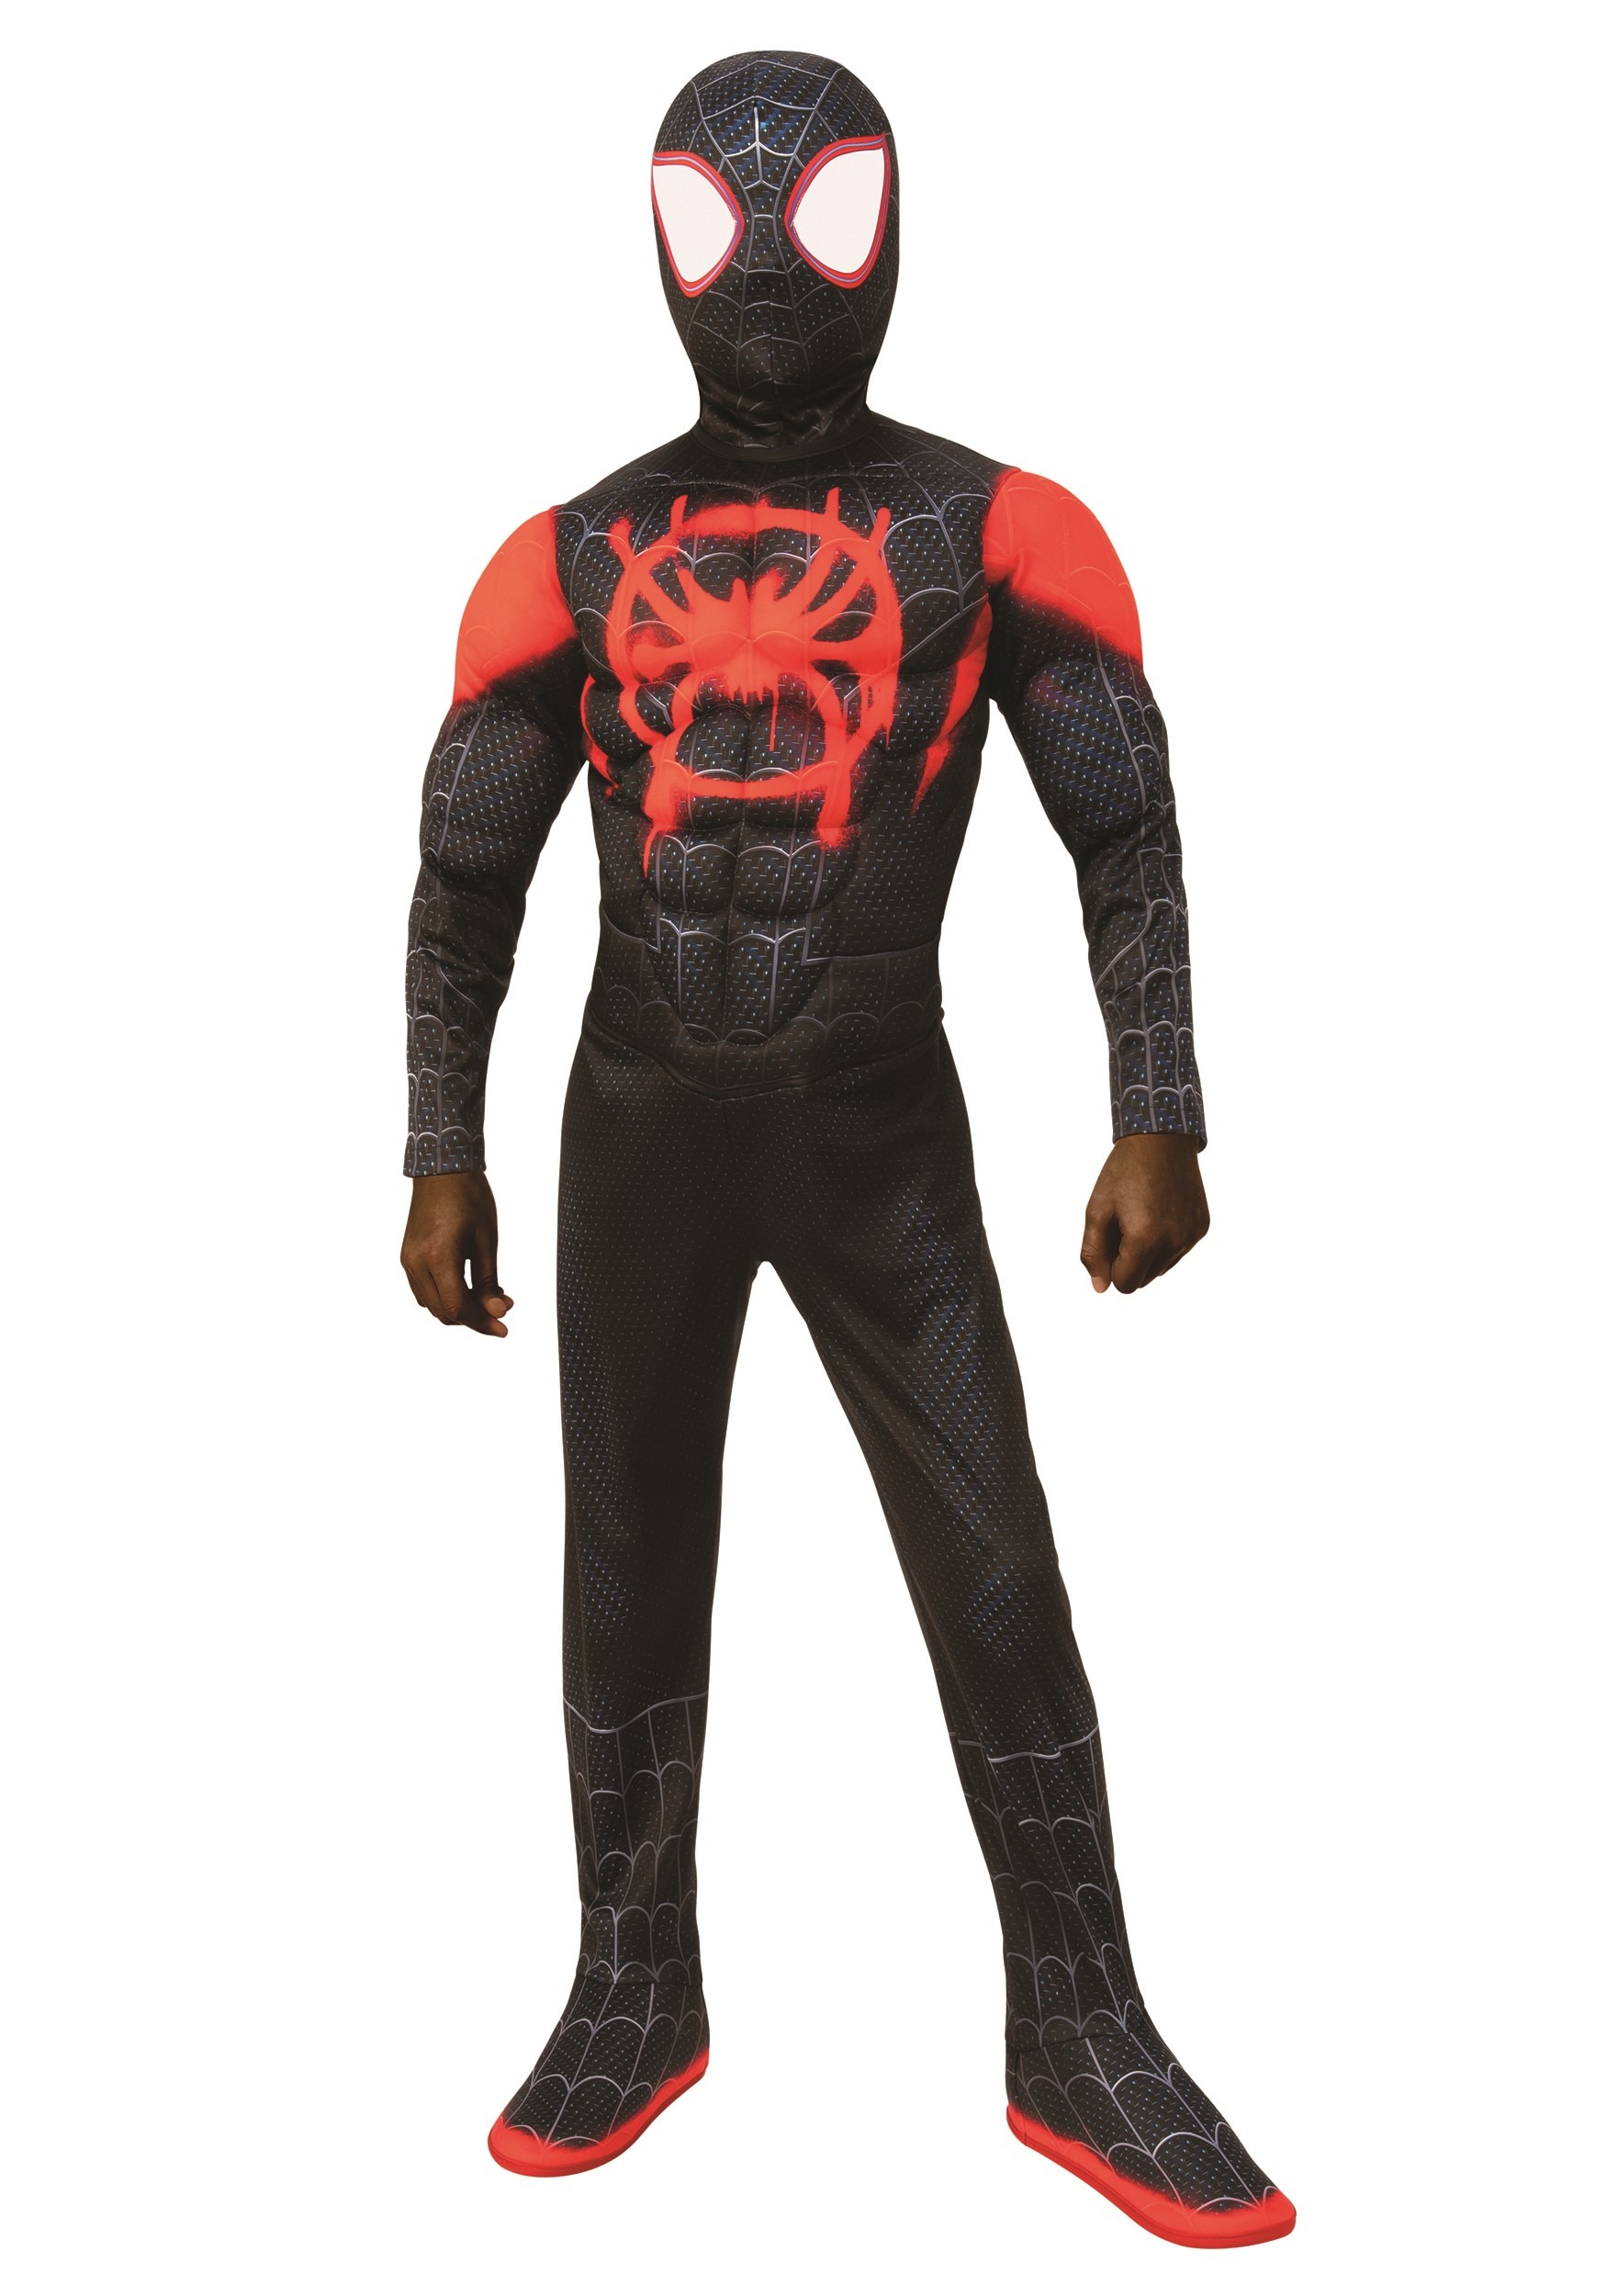 The Spider-Man Miles Morales Deluxe Child Costume